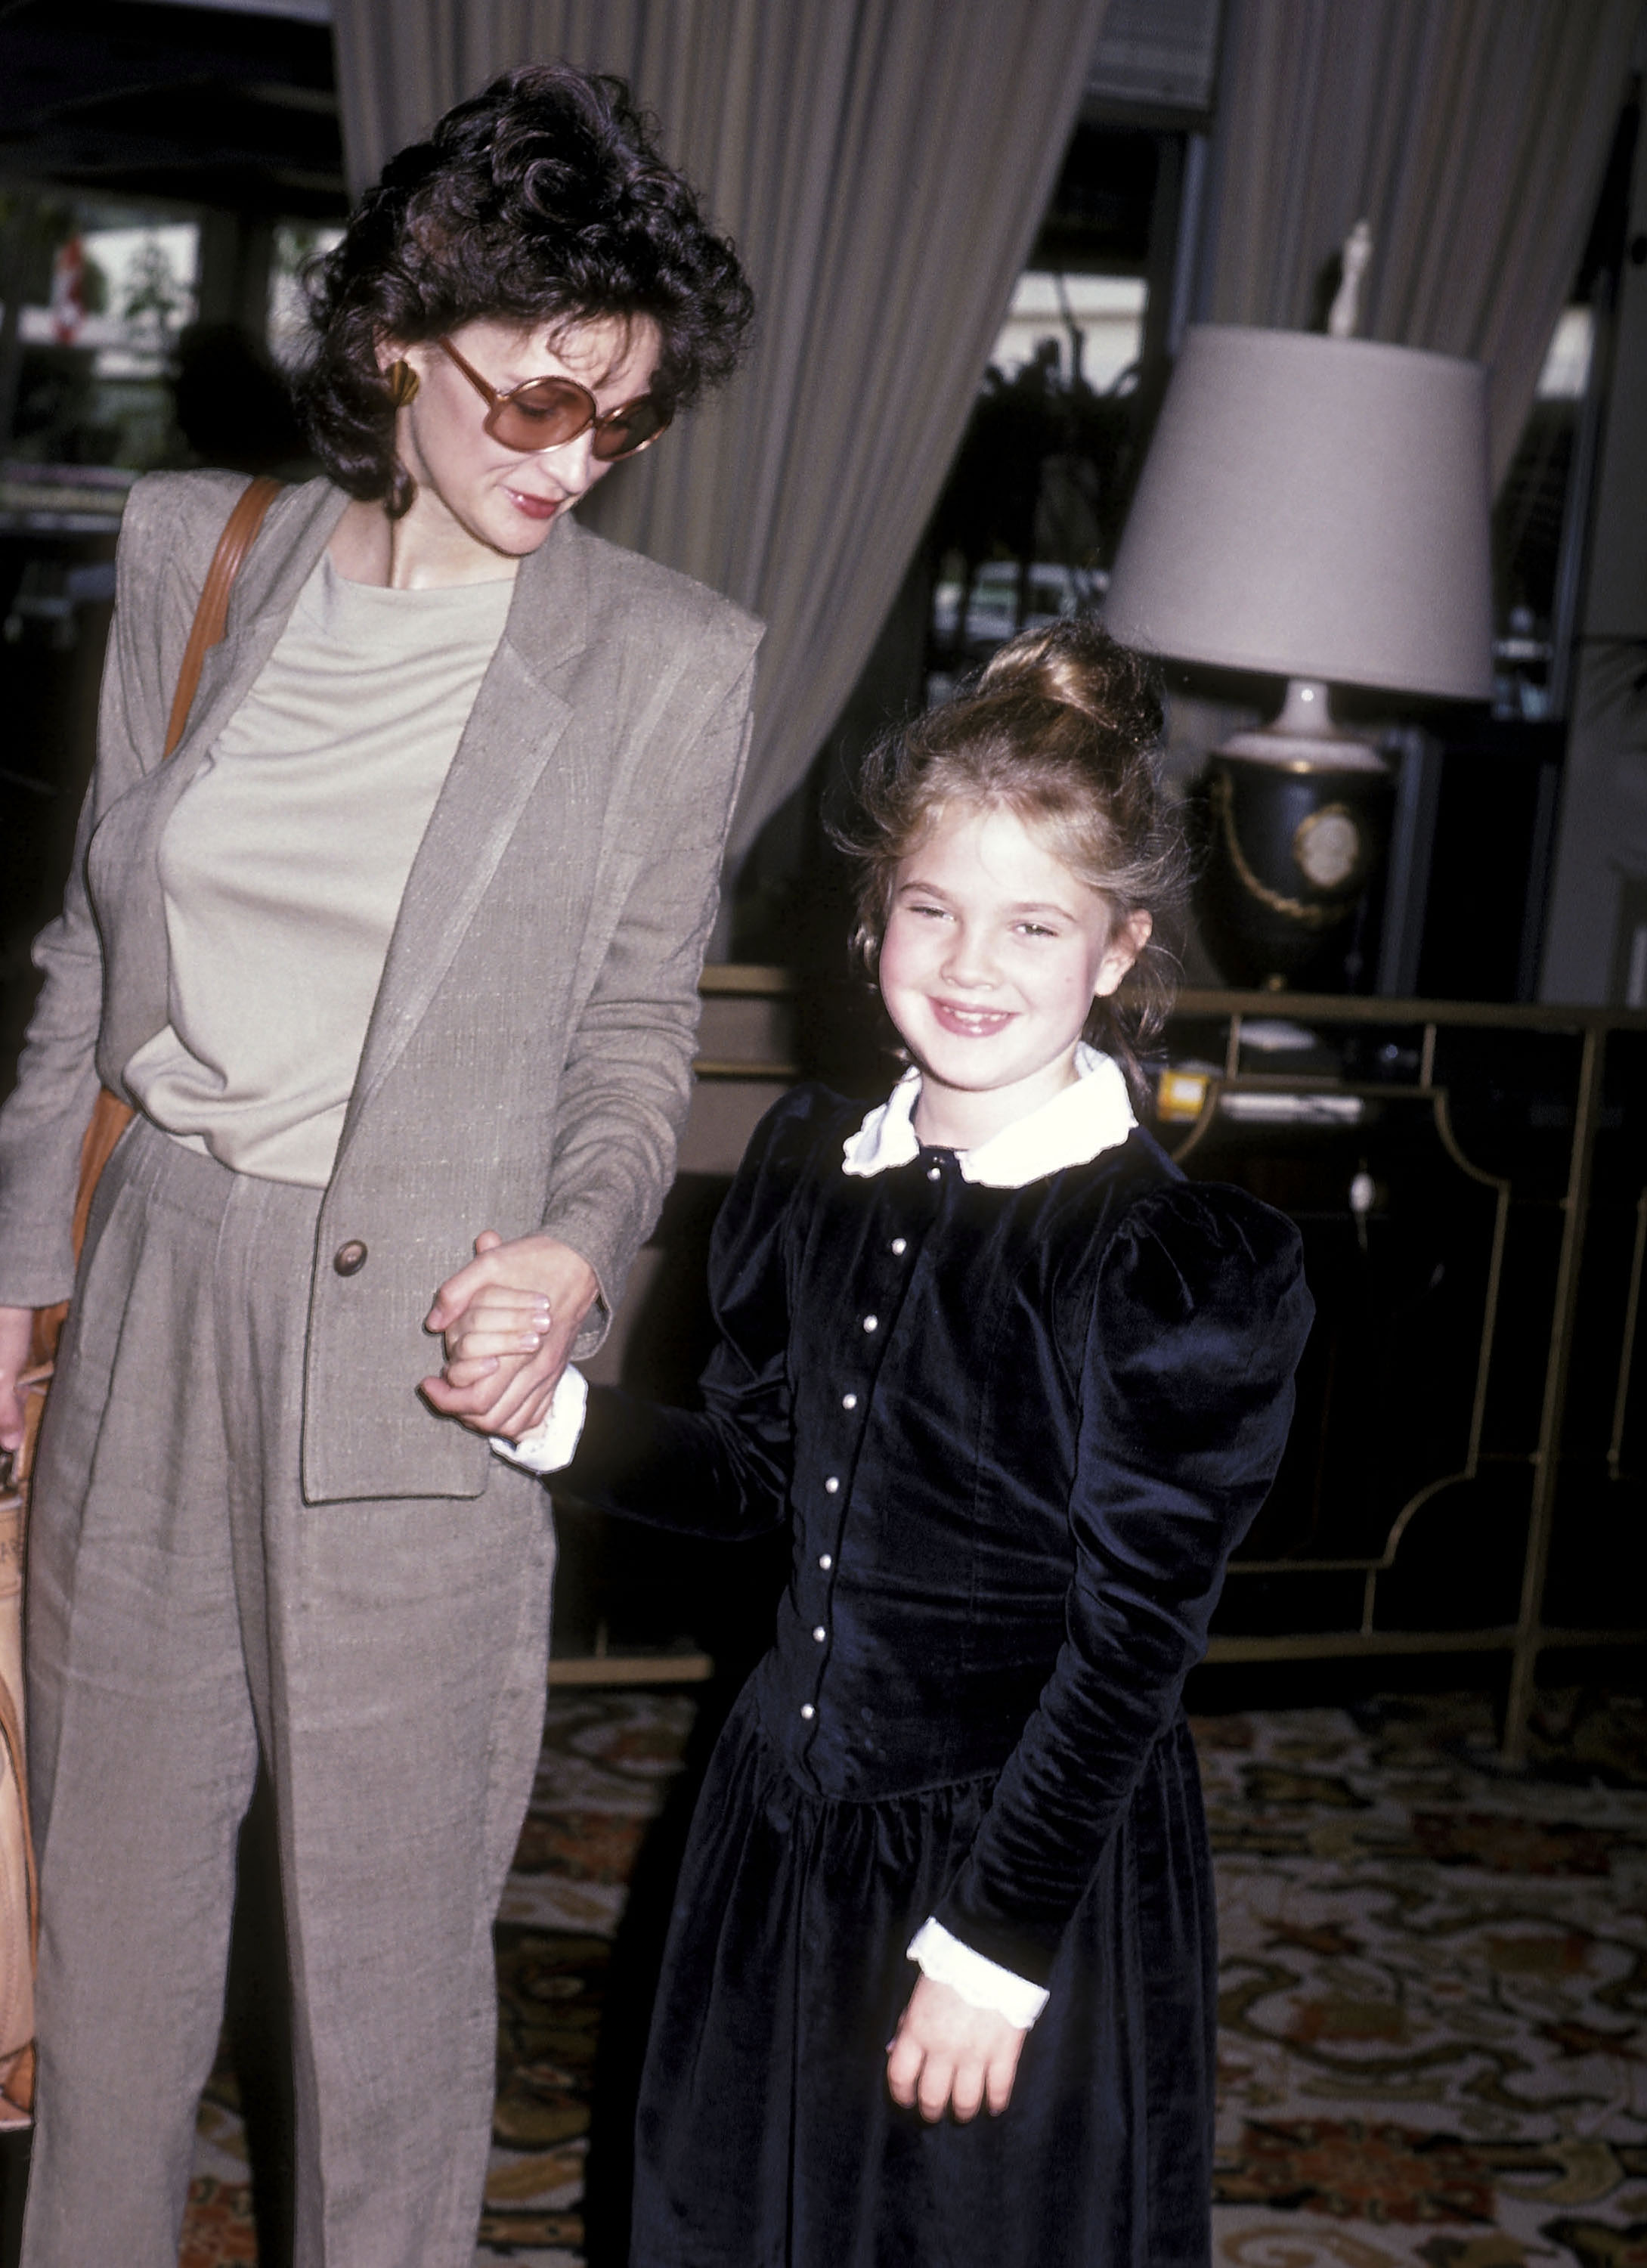 The movie star and her mother attend the Young Musicians Foundation's Second Annual Celebrity Mother/Daughter Fashion Show in Beverly Hills, California, on March 10, 1983. | Source: Getty Images